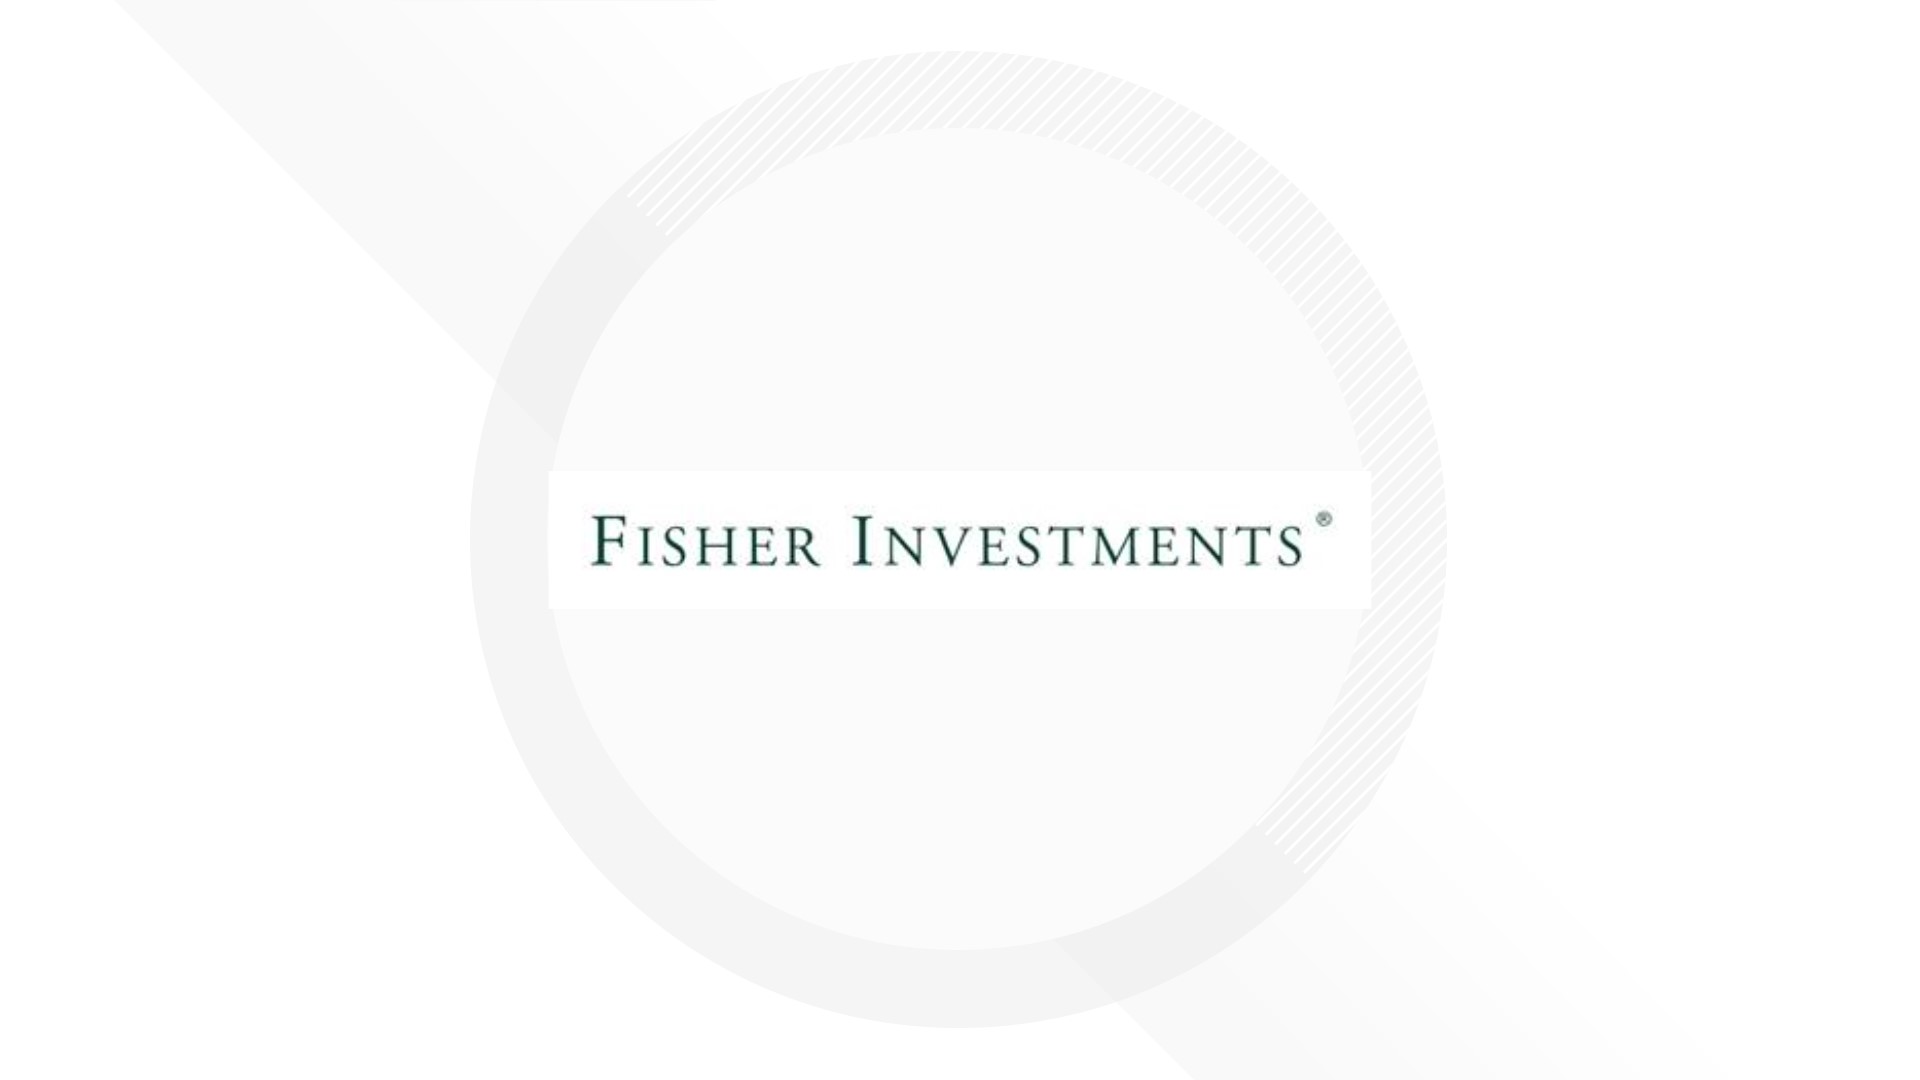 Fisher made the announcement after the Washington State Supreme Court upheld a new capital gains tax. Fisher said it will not close the Camas office.